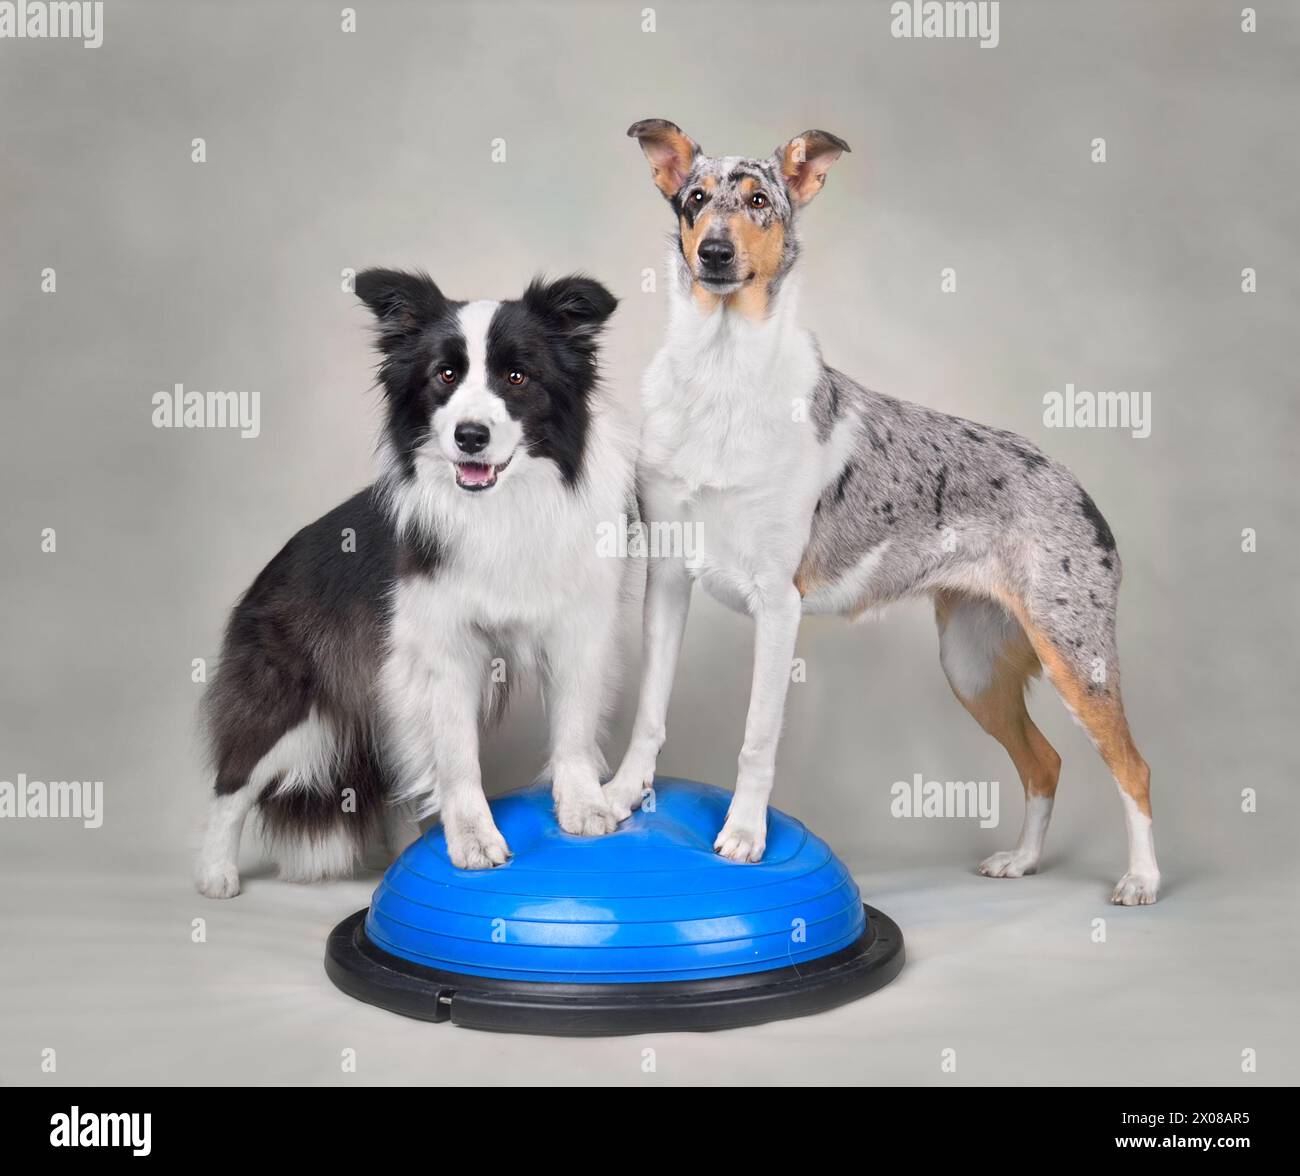 Cute Border collie and Smooth Collie standing on a balance disc durig dog fitness trainig Stock Photo